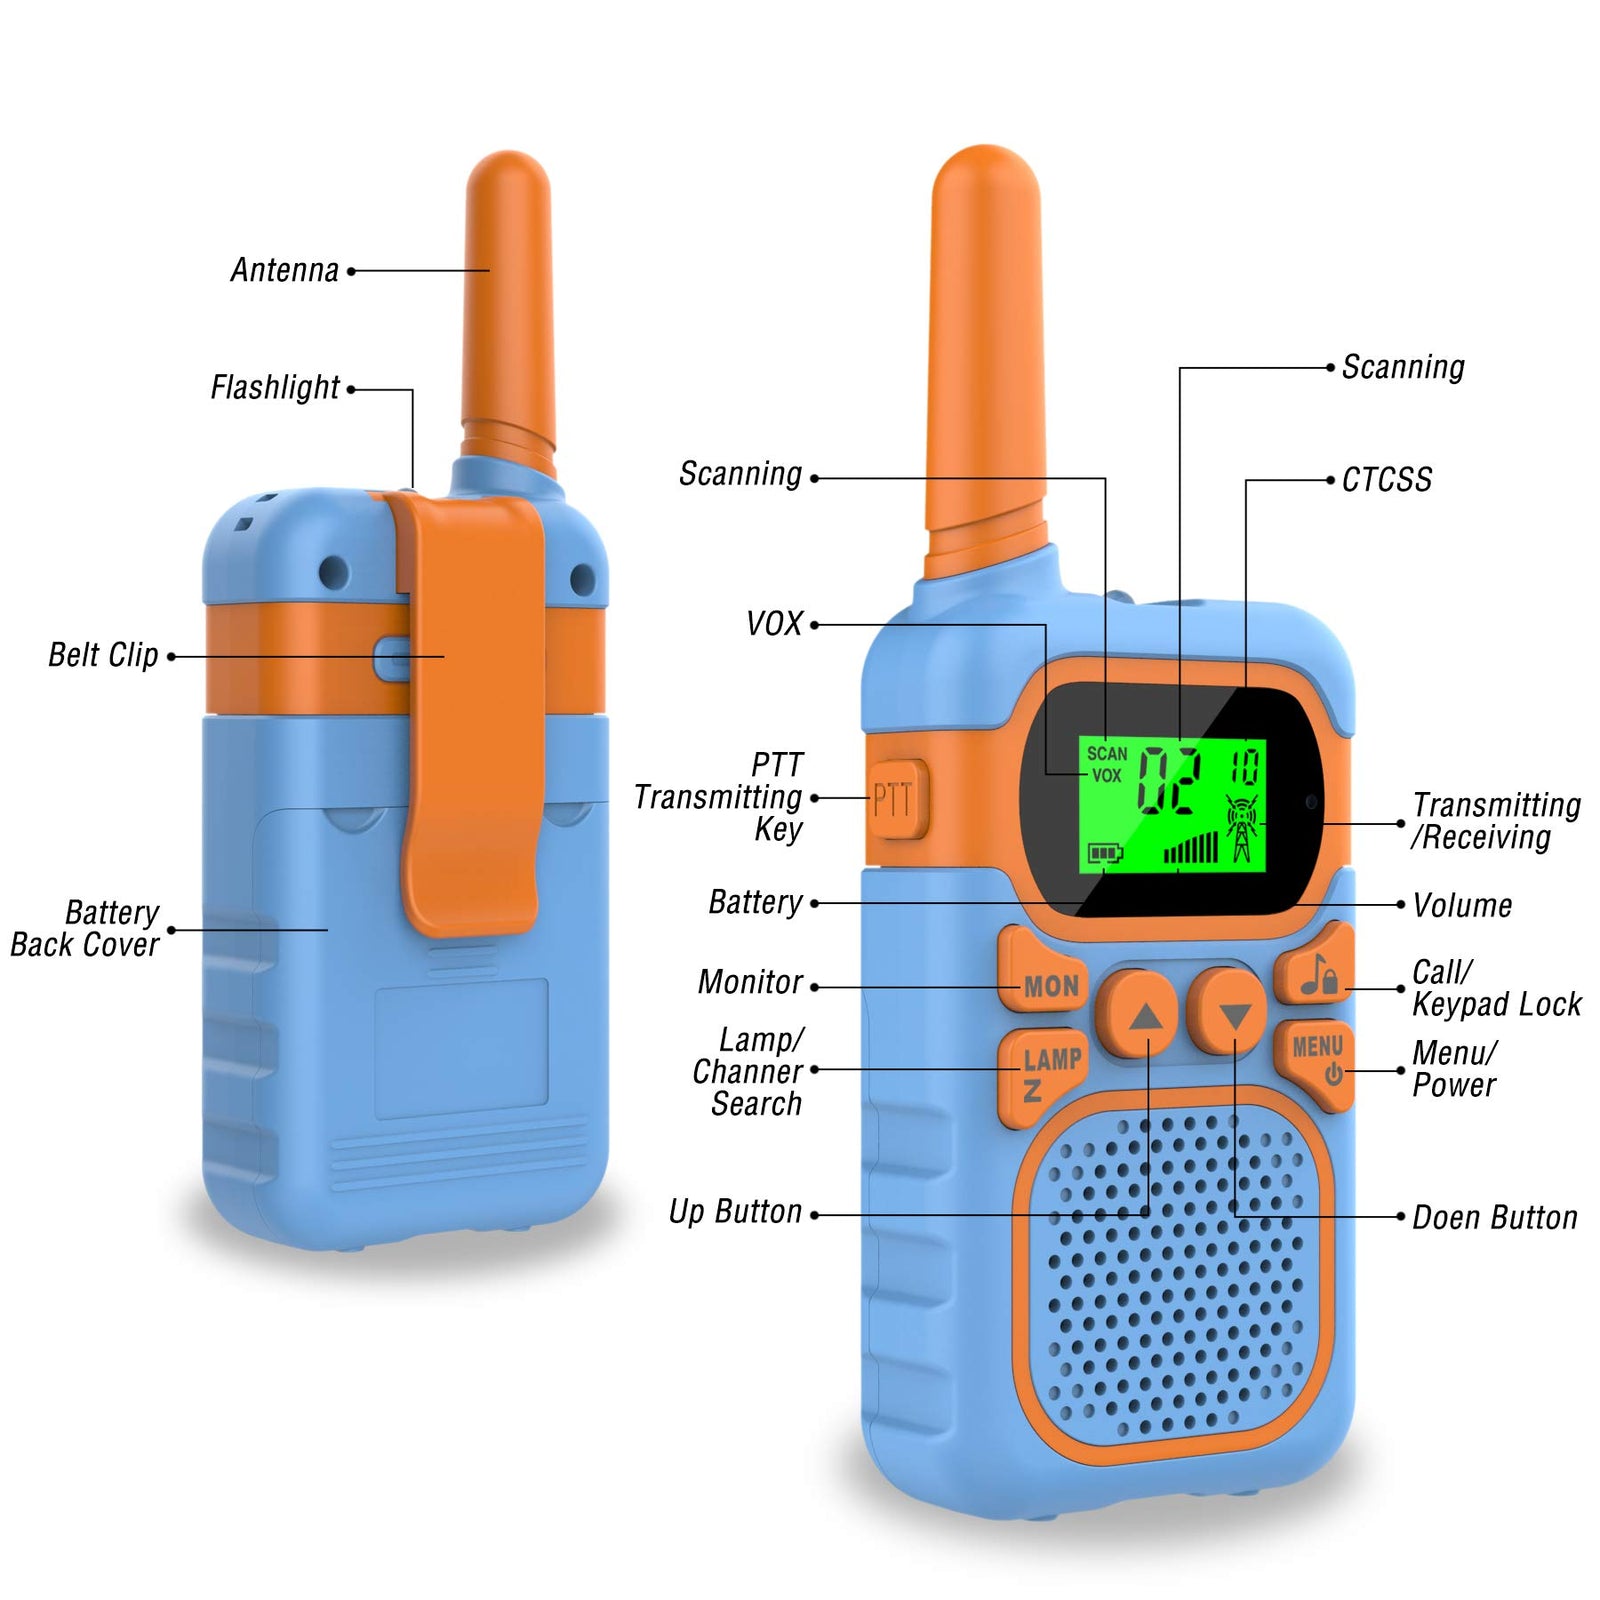 Kids Walkie Talkies with 22 Channels & 3 Mile Range, ITSHINY Walkie Talkies for Kids [3 Pack] with Backlit LCD Flashlight Birthday Toys Gifts